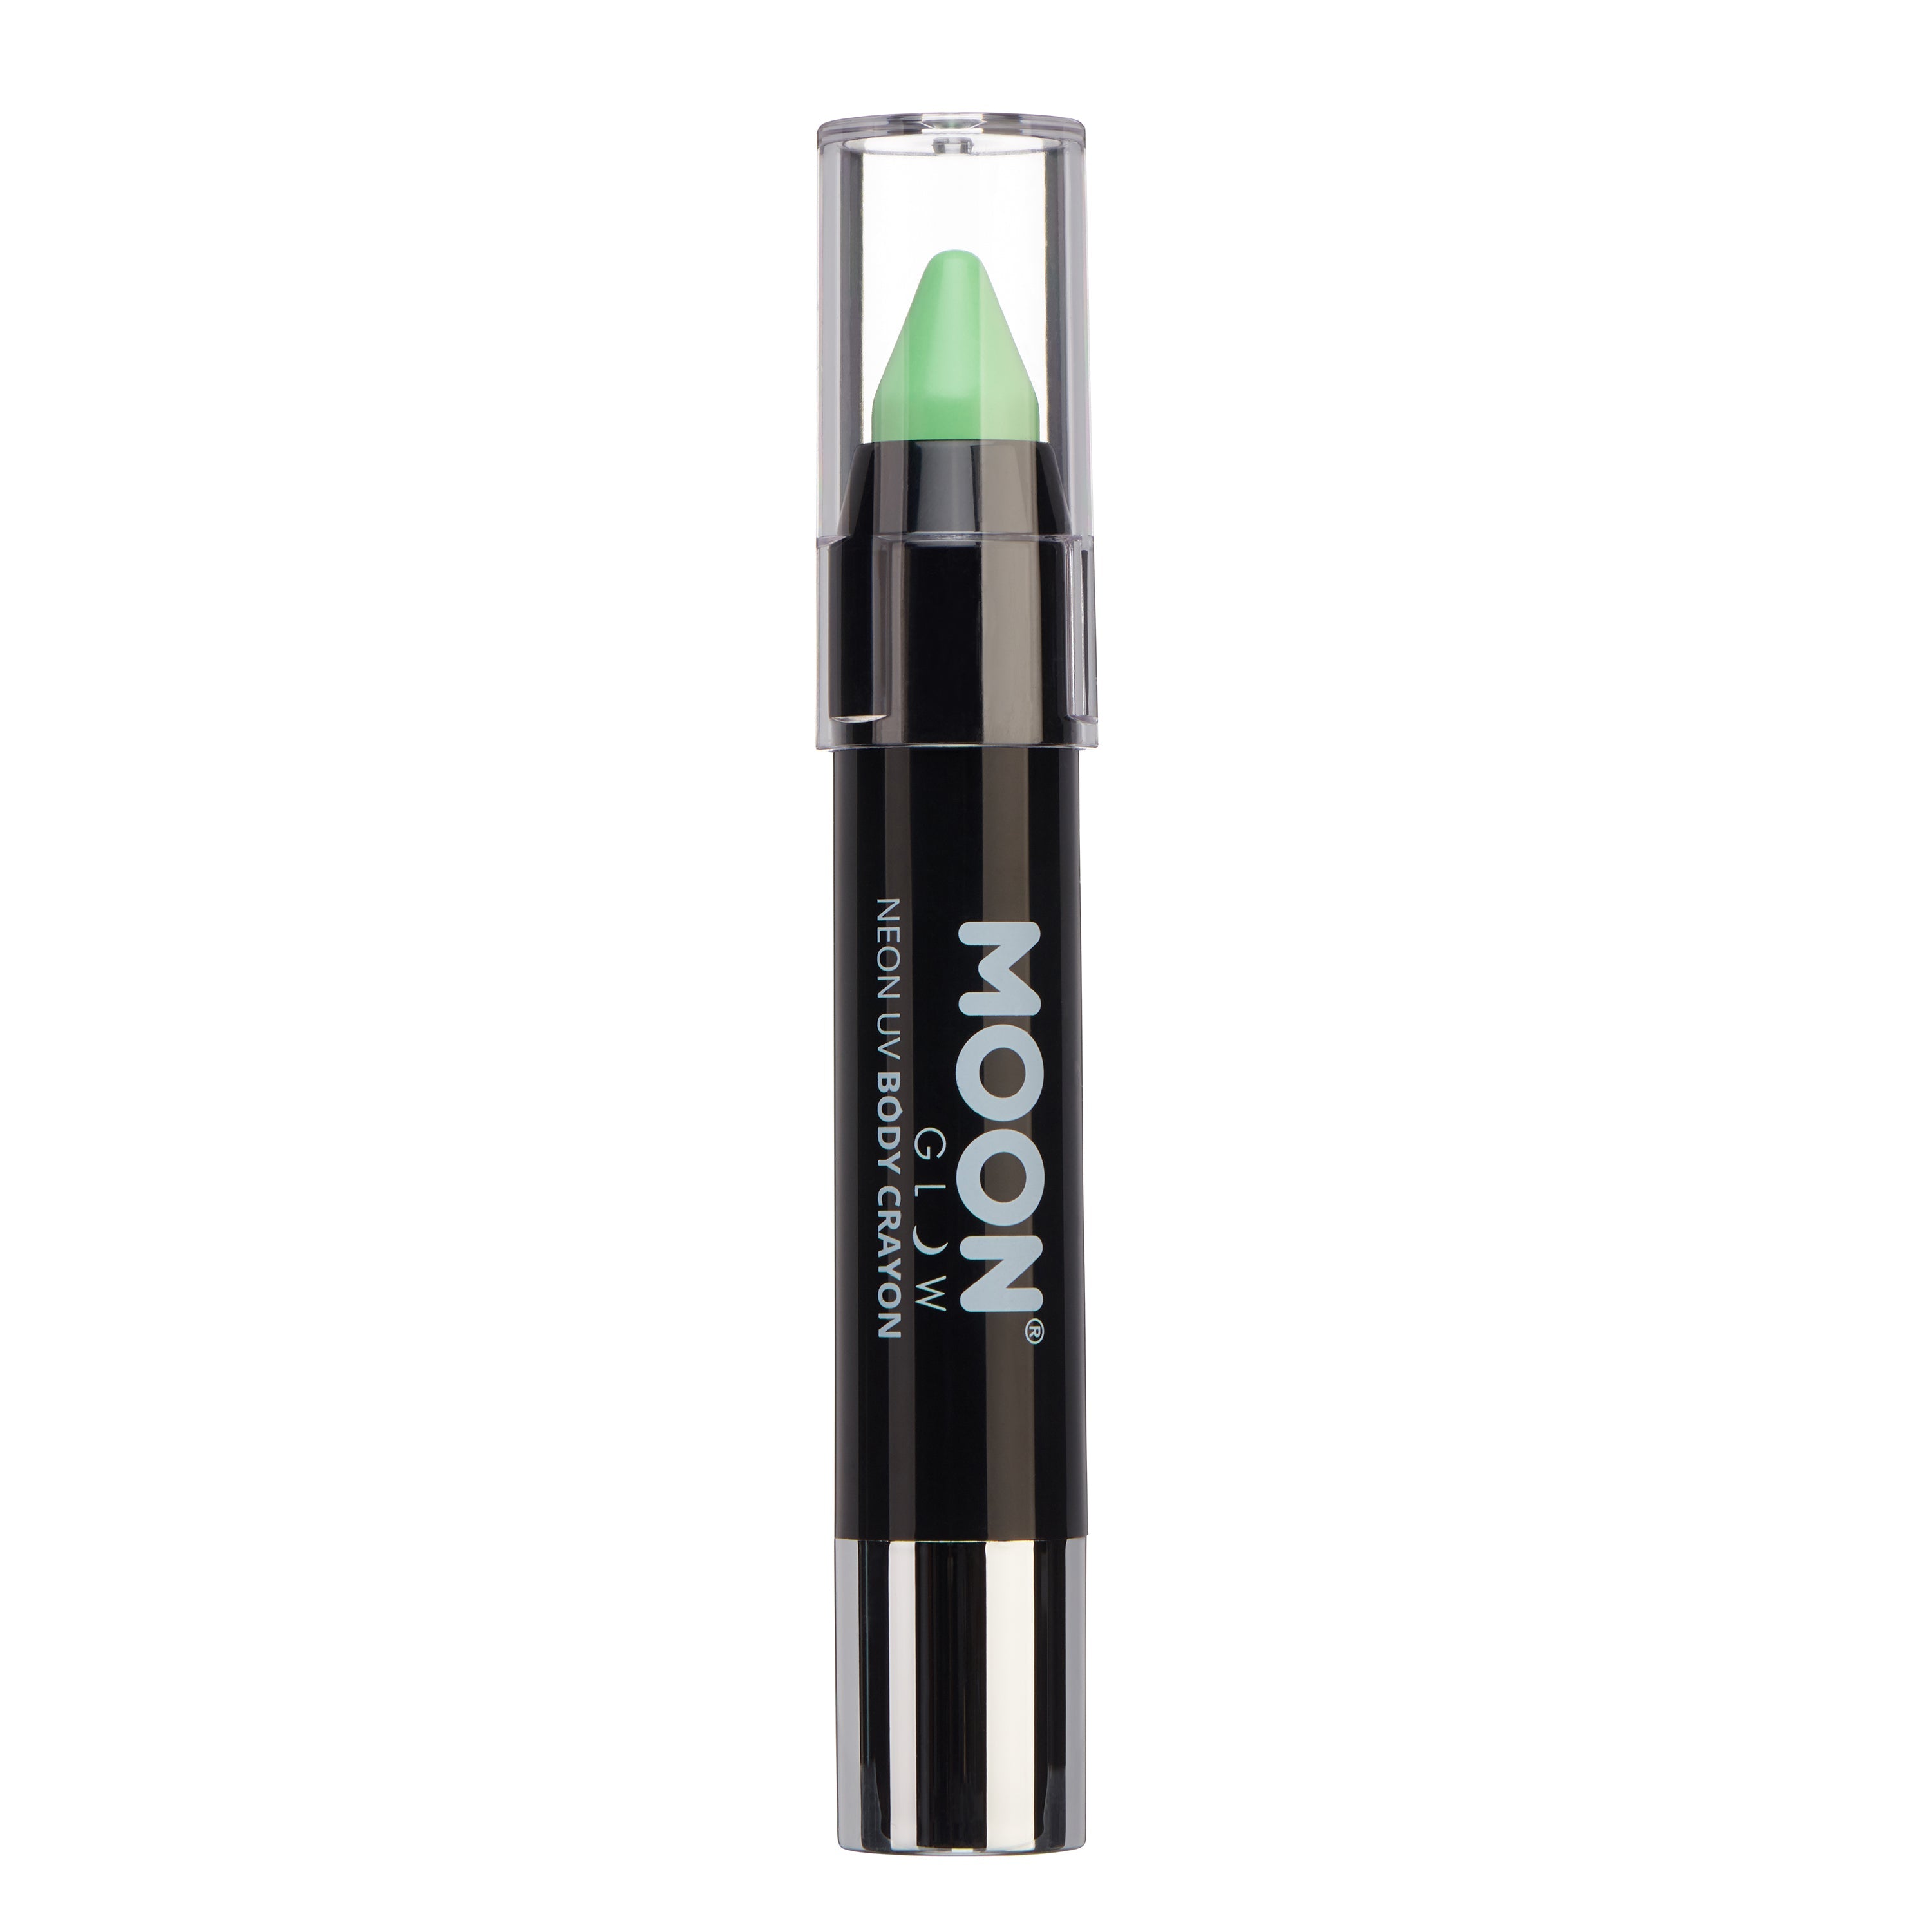 Pastel Green - Neon UV Glow Blacklight Face & Body Crayon, 3.5g. Cosmetically certified, FDA & Health Canada compliant and cruelty free.